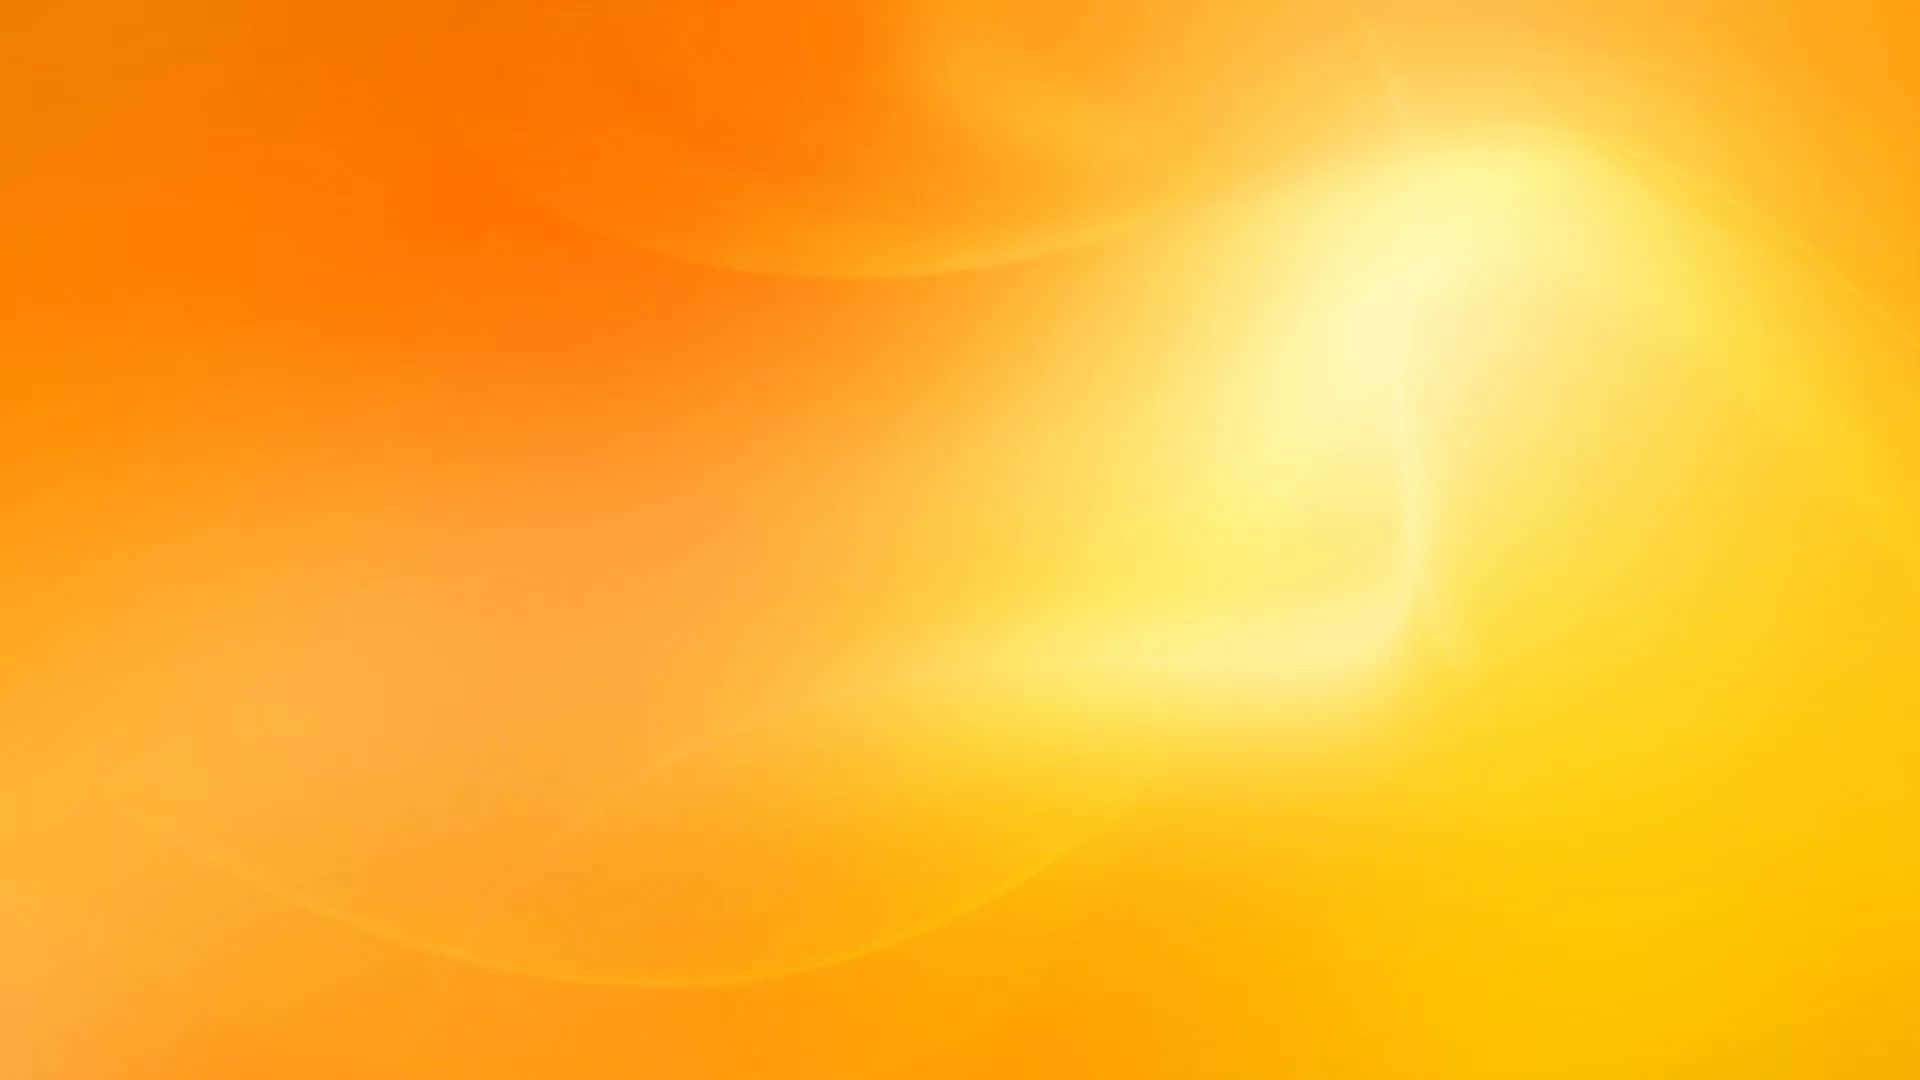 Warm Fusion - Vivid Orange and Yellow Abstract Background